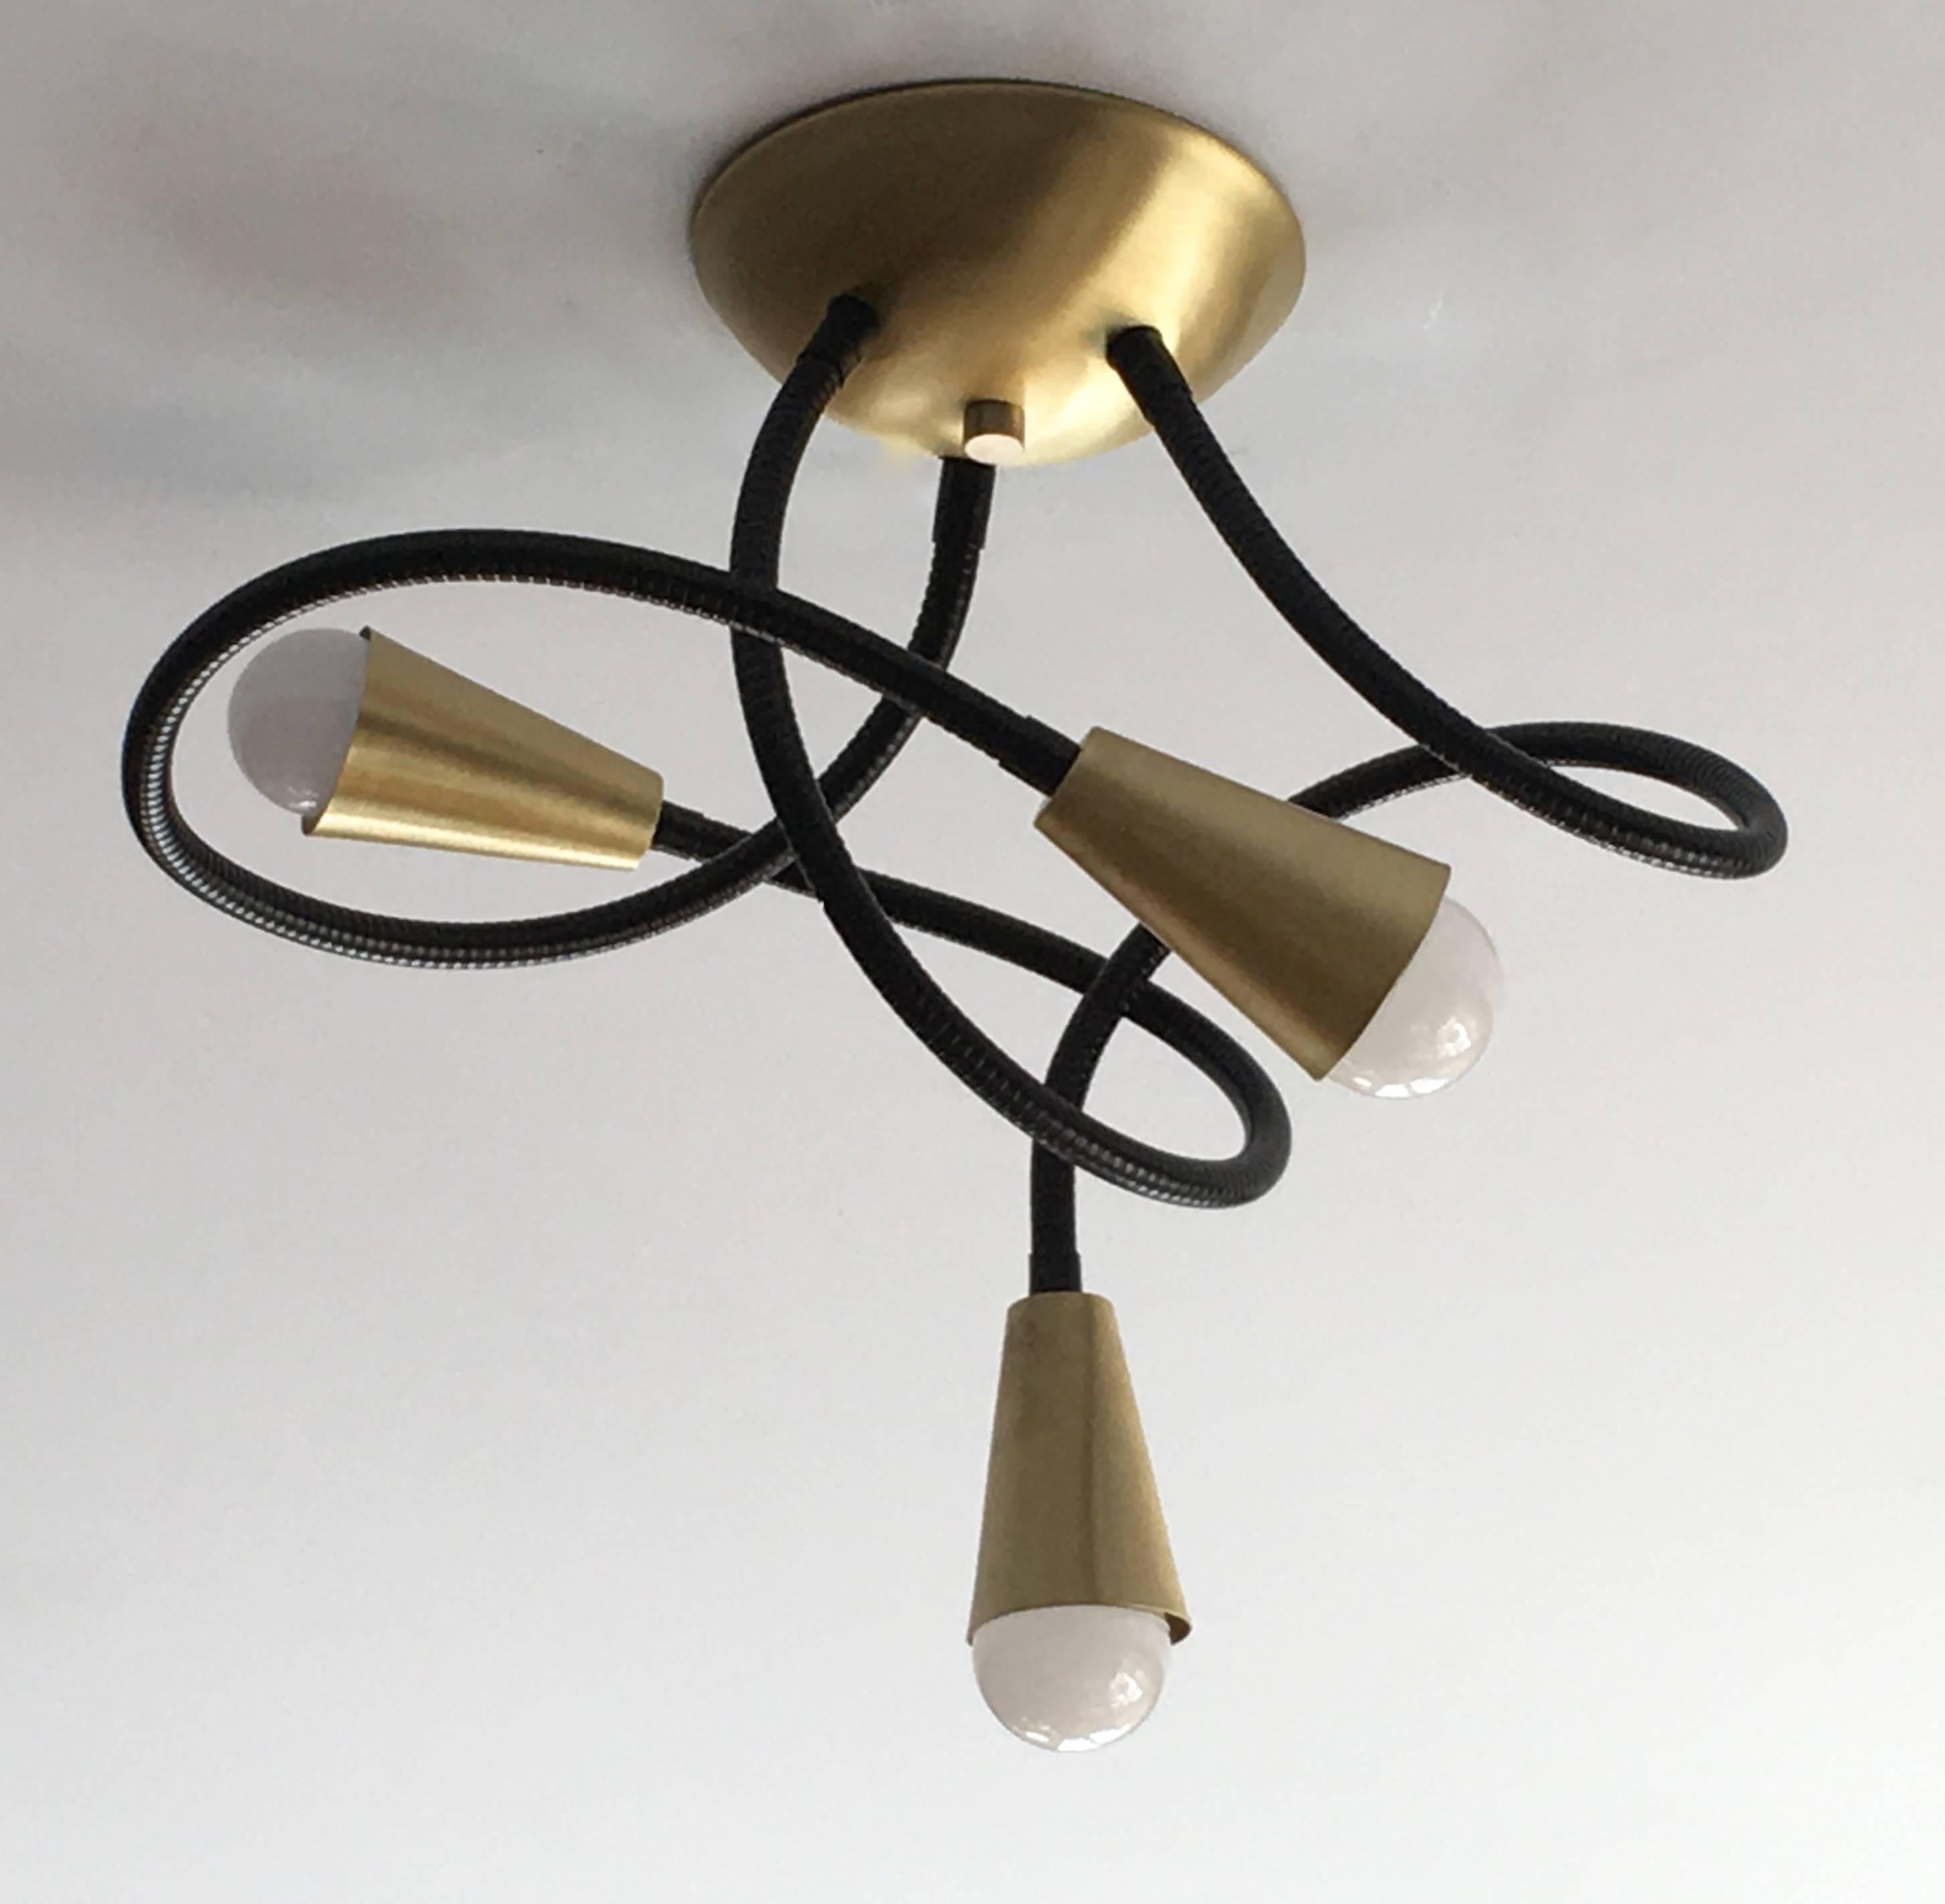 Ceiling mounted Meander light featuring three flexible metal arms which allow you to adjust and pose the light fixture; shown here with metal arms in standard black finish, and solid brushed brass fittings; 27 inch arms, 6 inch diameter ceiling